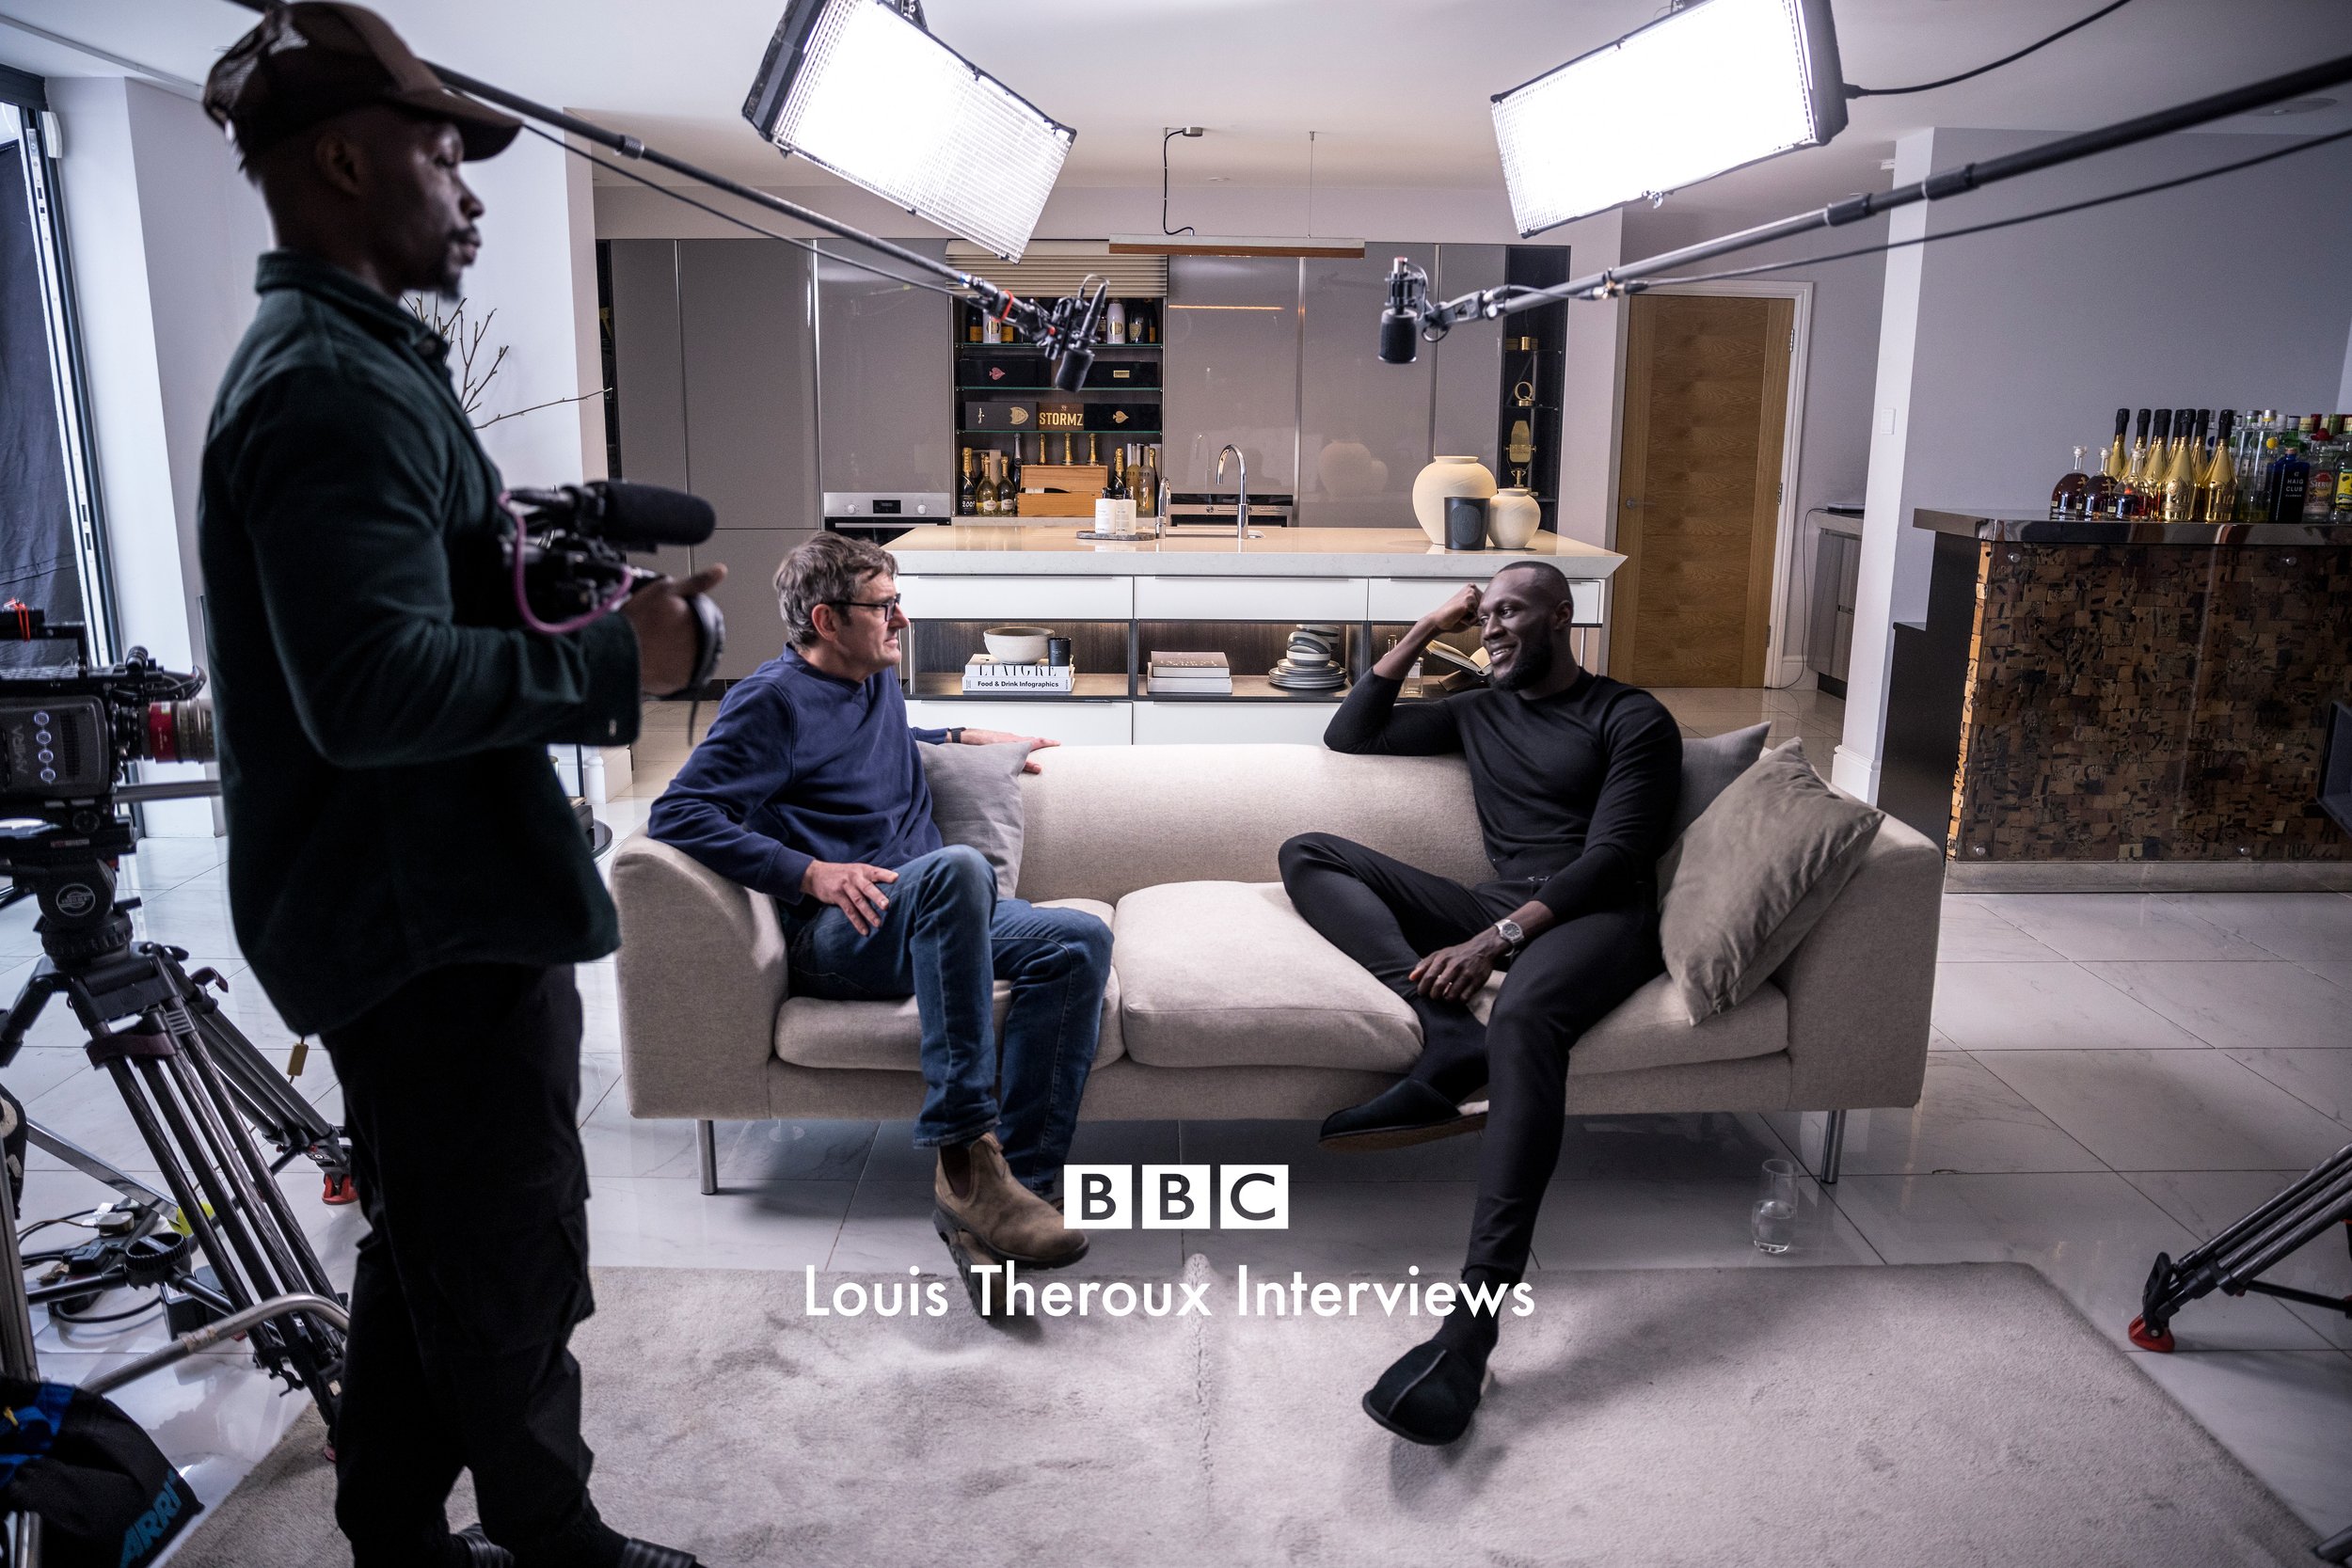 016_LTI_Stormzy and Louis in interview setup_RP3A9100_Hirez.jpg